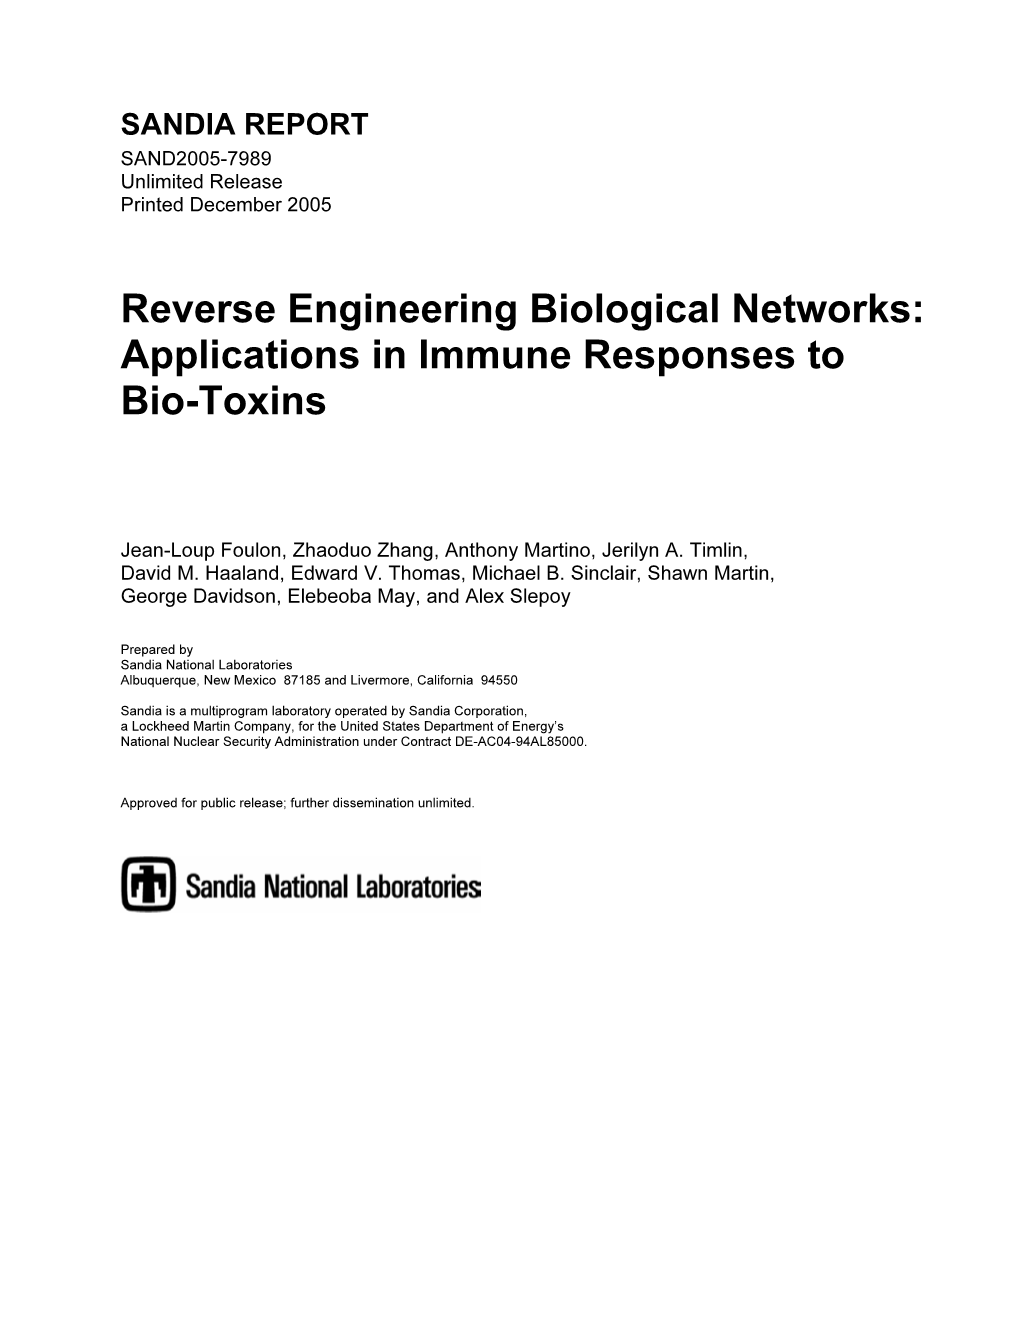 Reverse Engineering Biological Networks: Applications in Immune Responses to Bio-Toxins